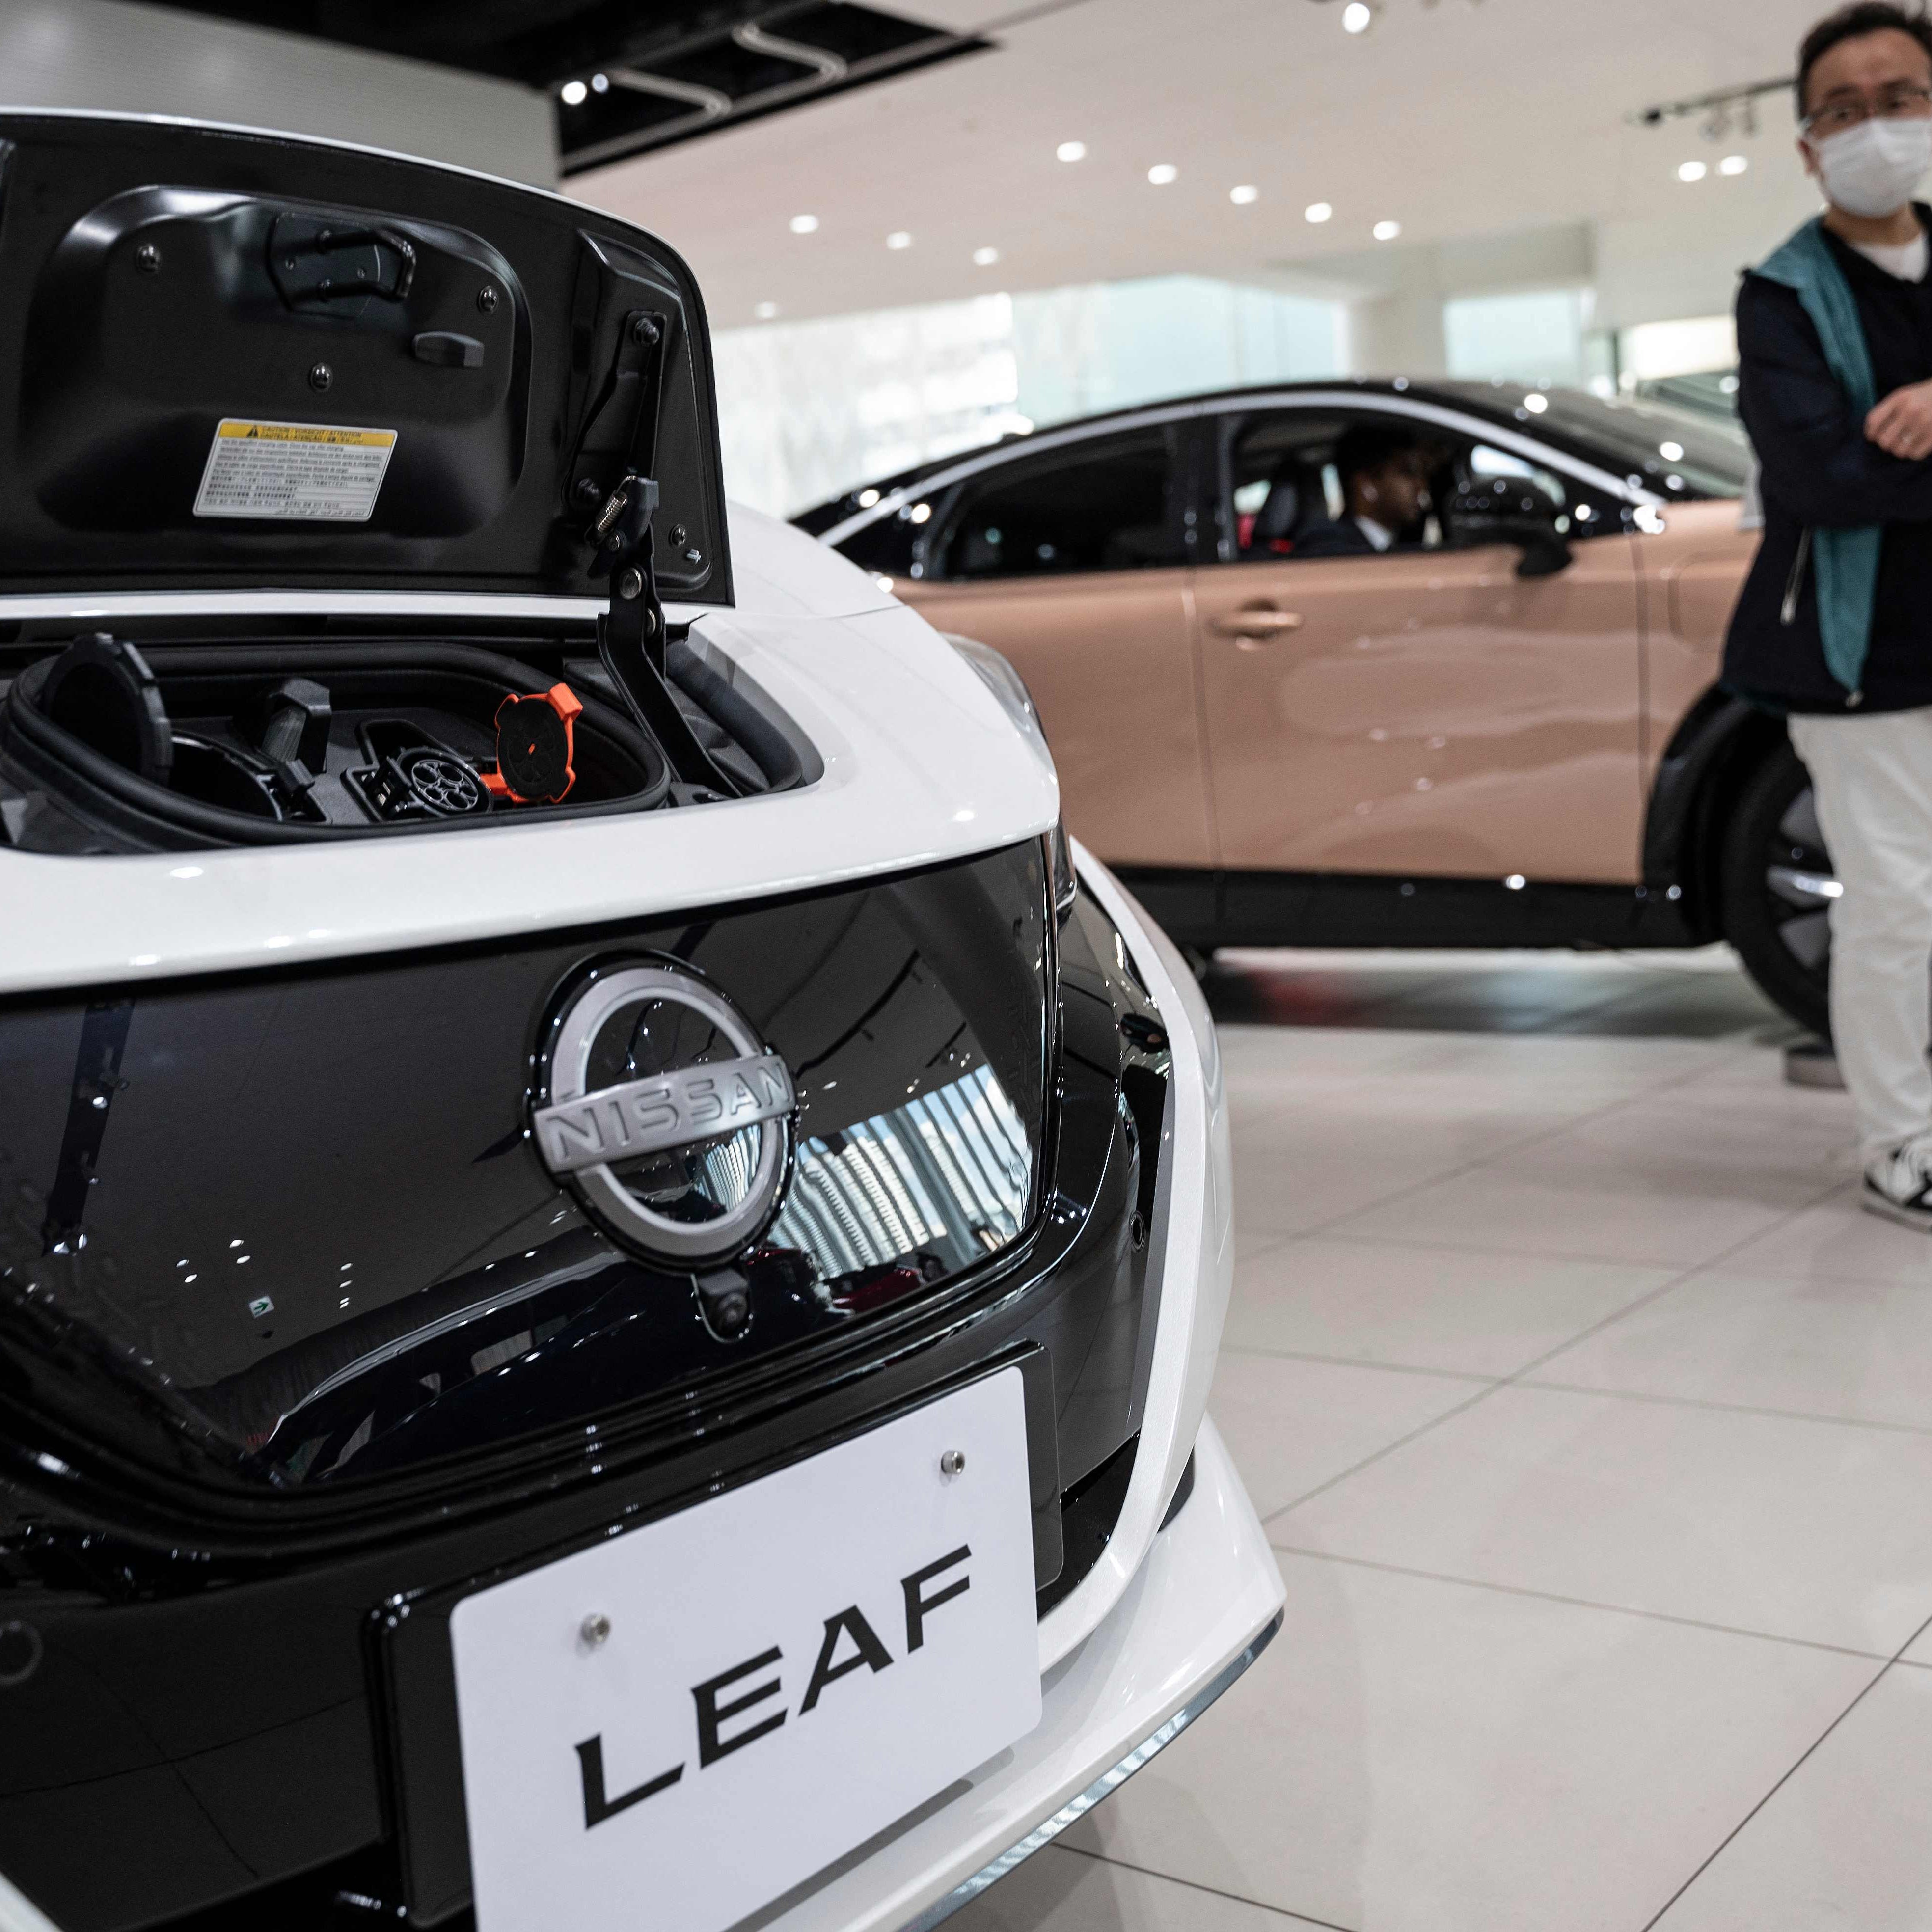 This photo taken on March 30, 2023 shows a man walking past one of Nissan's electric vehicles (EV), the Leaf, at the global headquarters of Japanese automaker Nissan Motor in Yokohama, Kanagawa prefecture.